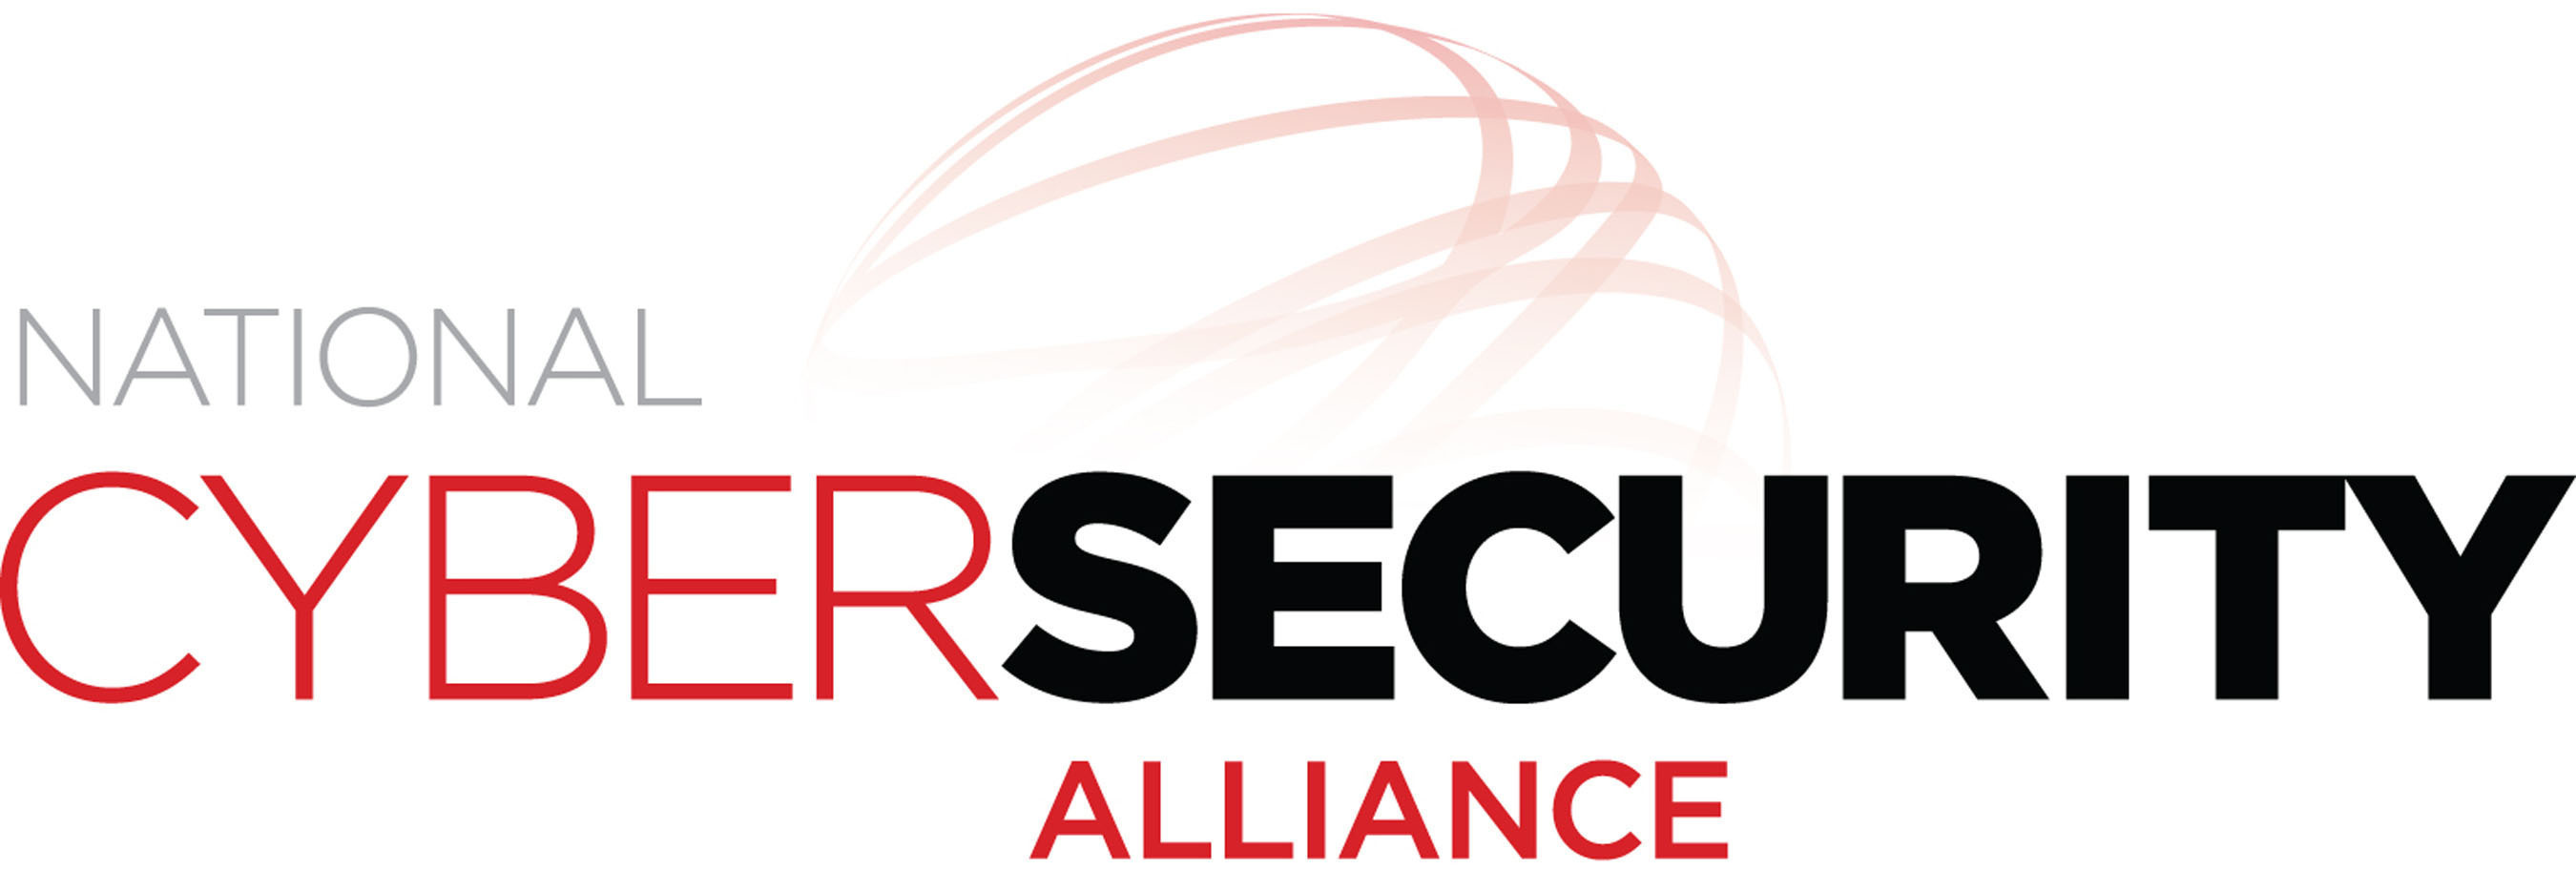 National Cyber Security Alliance